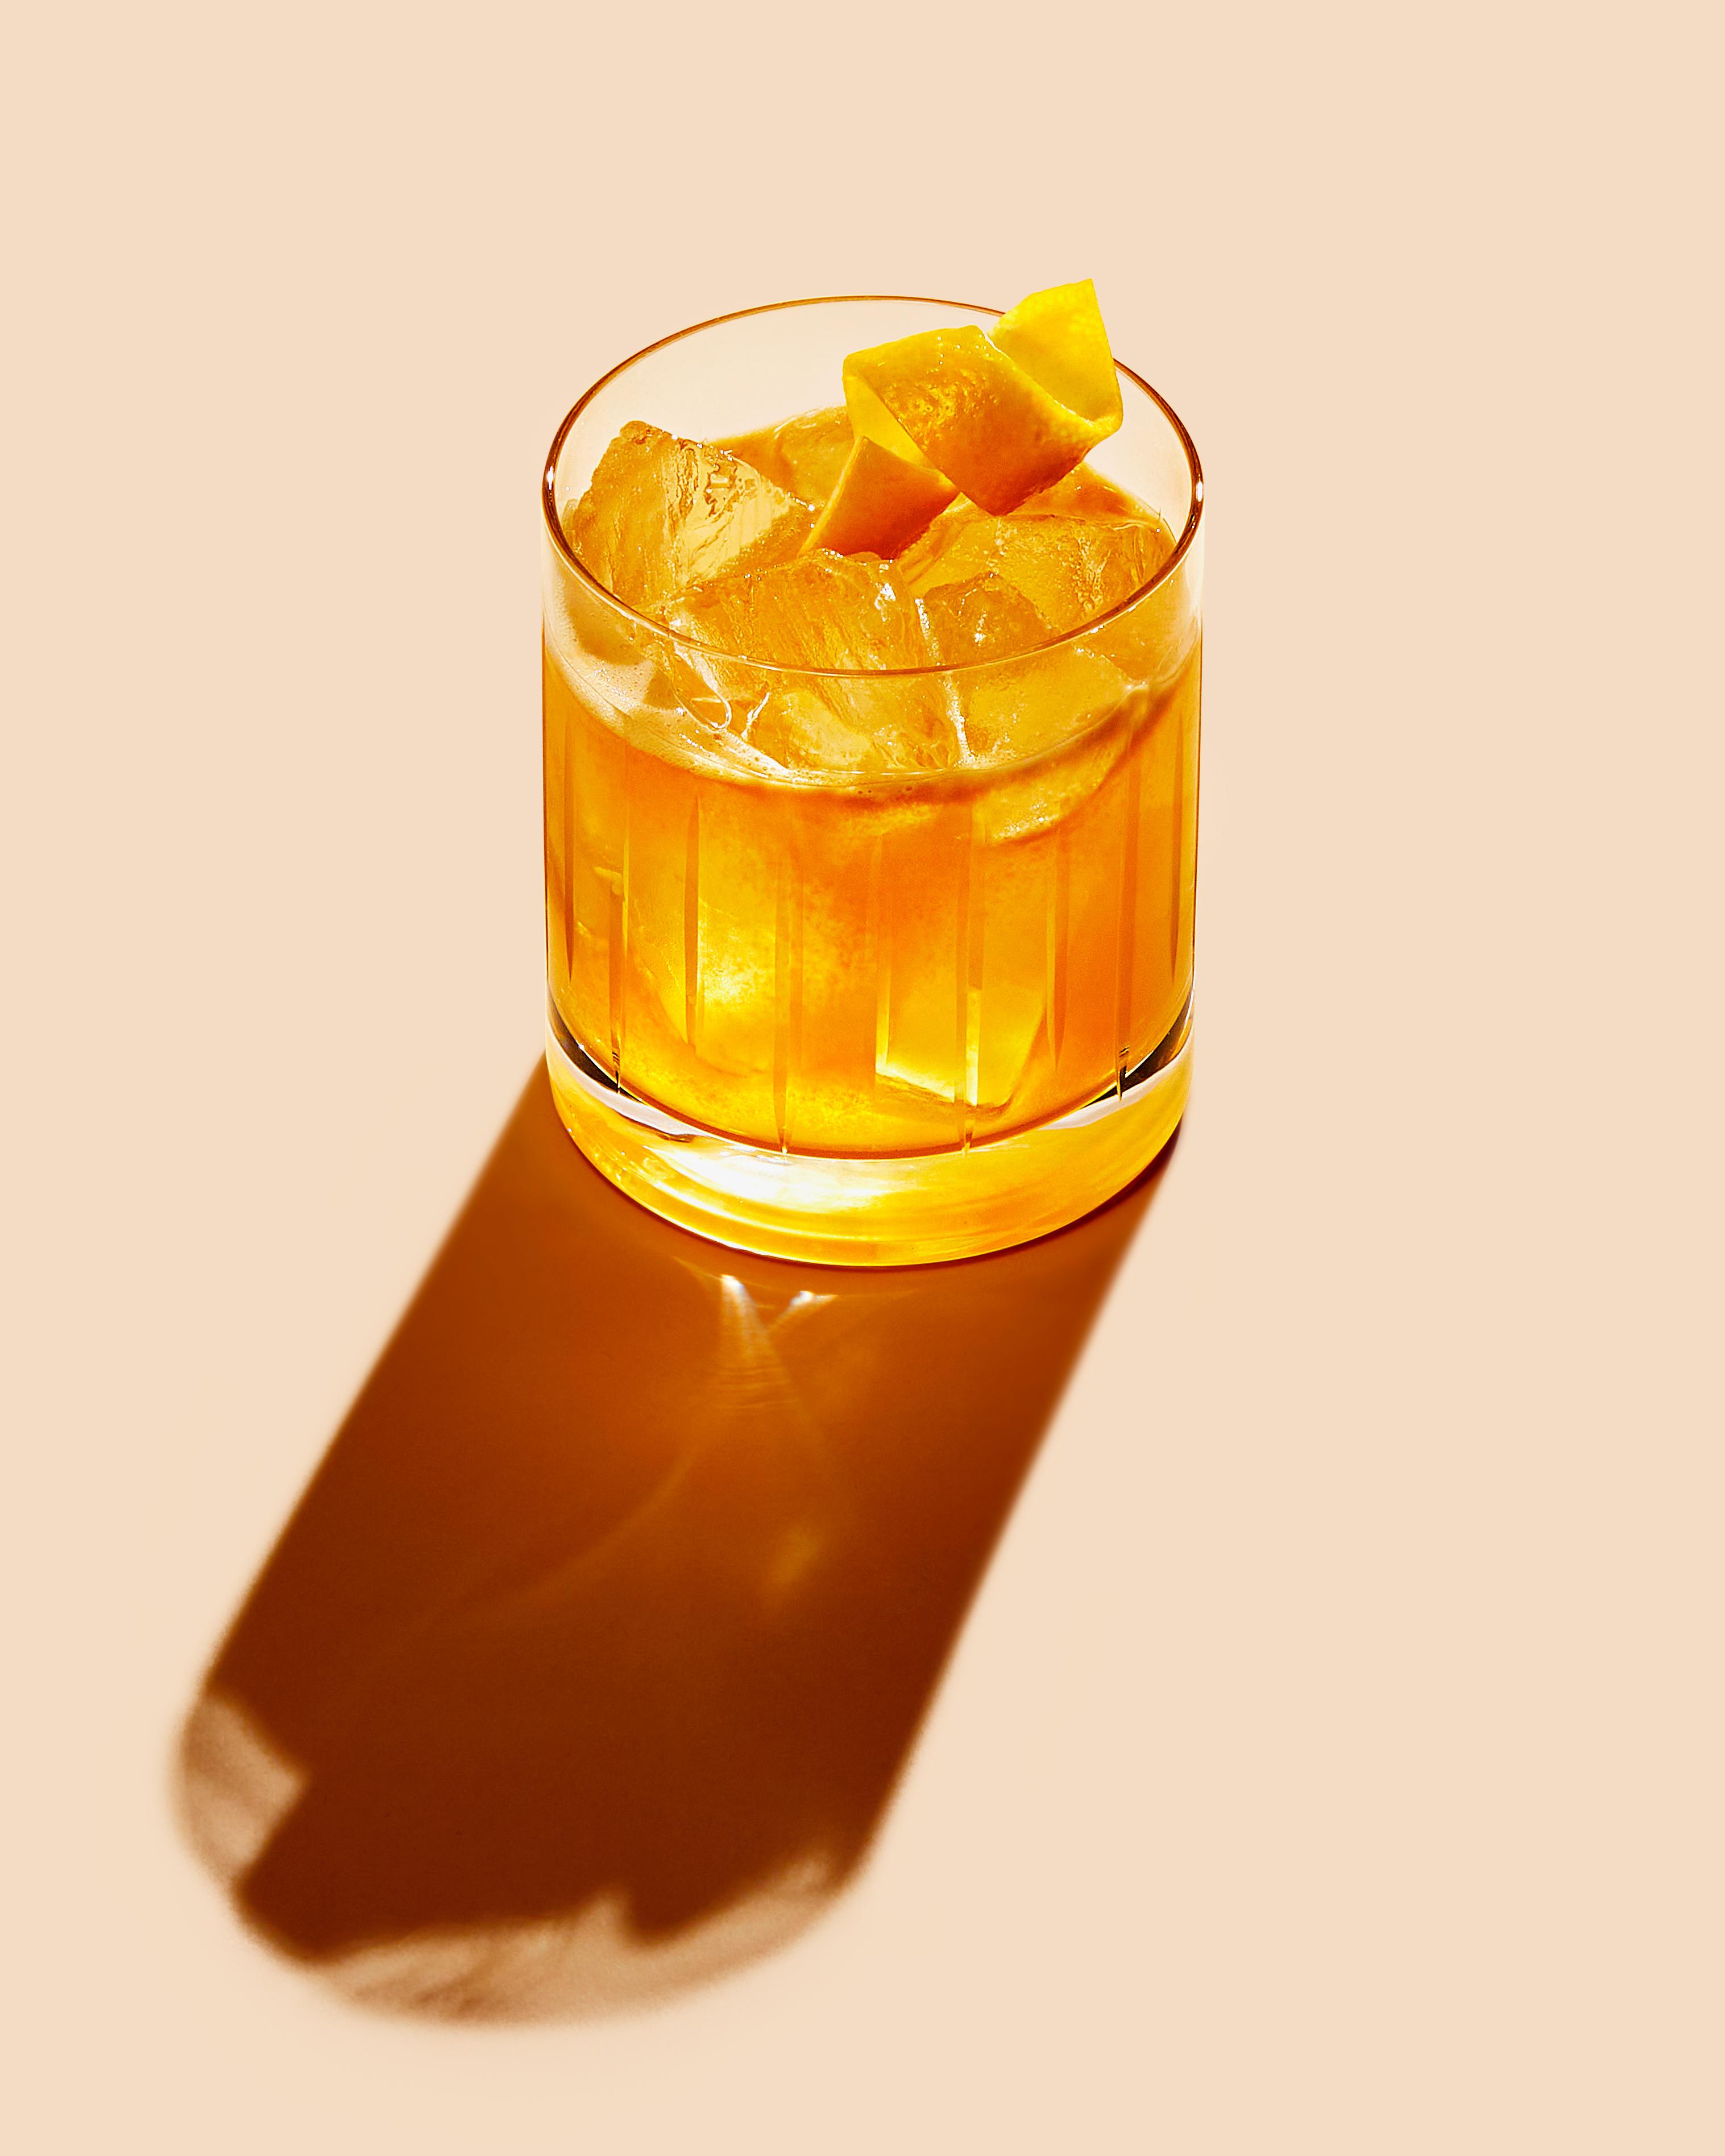 Beam Suntory Cocktail Old Fashioned Johanna Brannan Lowe Food and Prop Stylist | packaging New York